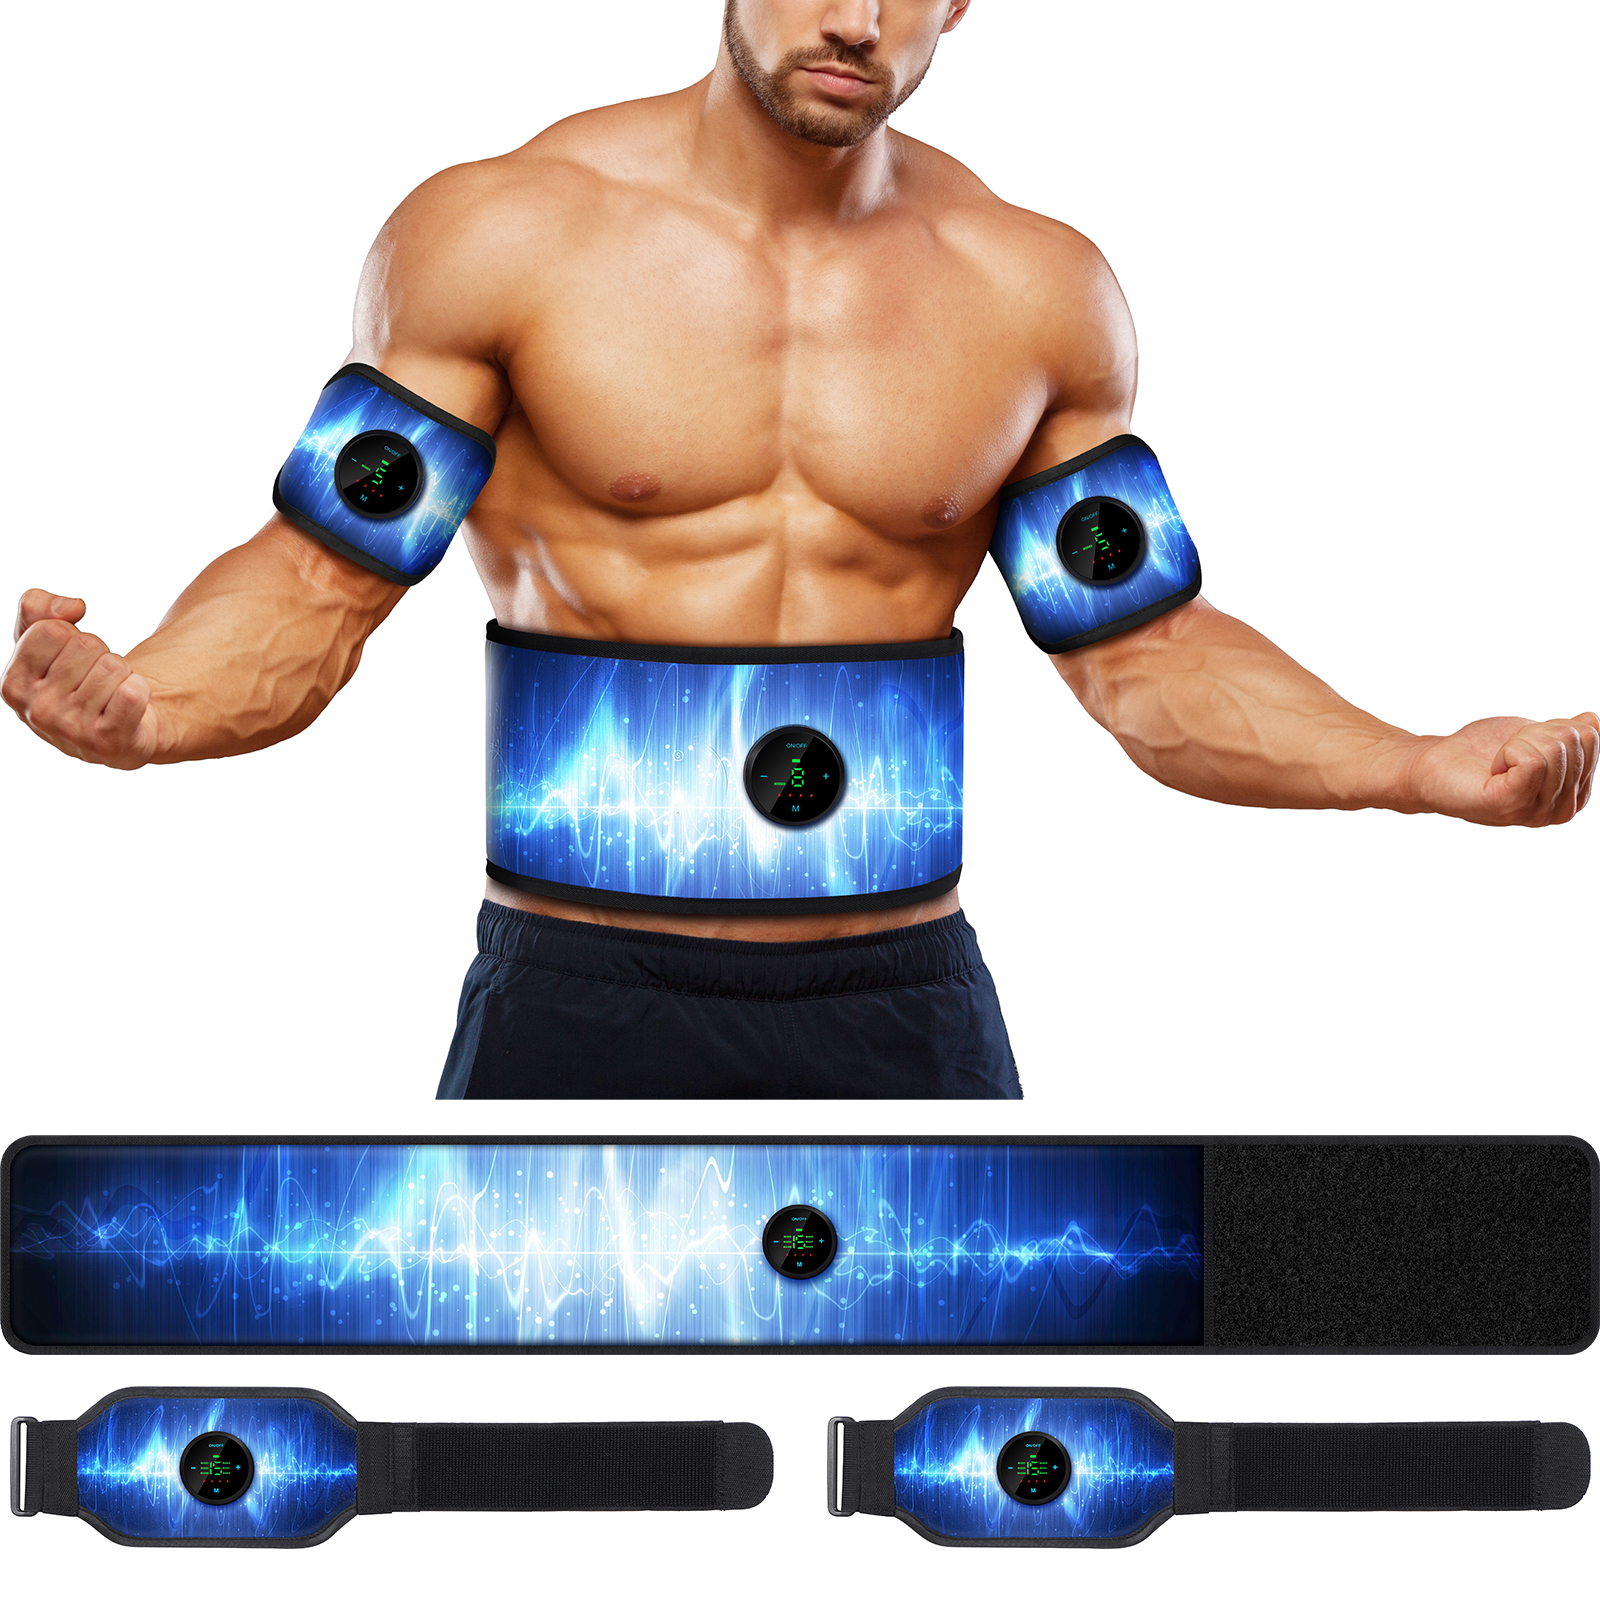 Smiofo ABS Stimulator, Muscle Machine Workout Equipment, Ab Toning Belt  Muscle Toner Fitness Training for Abdomen/Arm/Leg, Ab Trainer for Home Body  Shape_Body_Product_Products_Smiofo